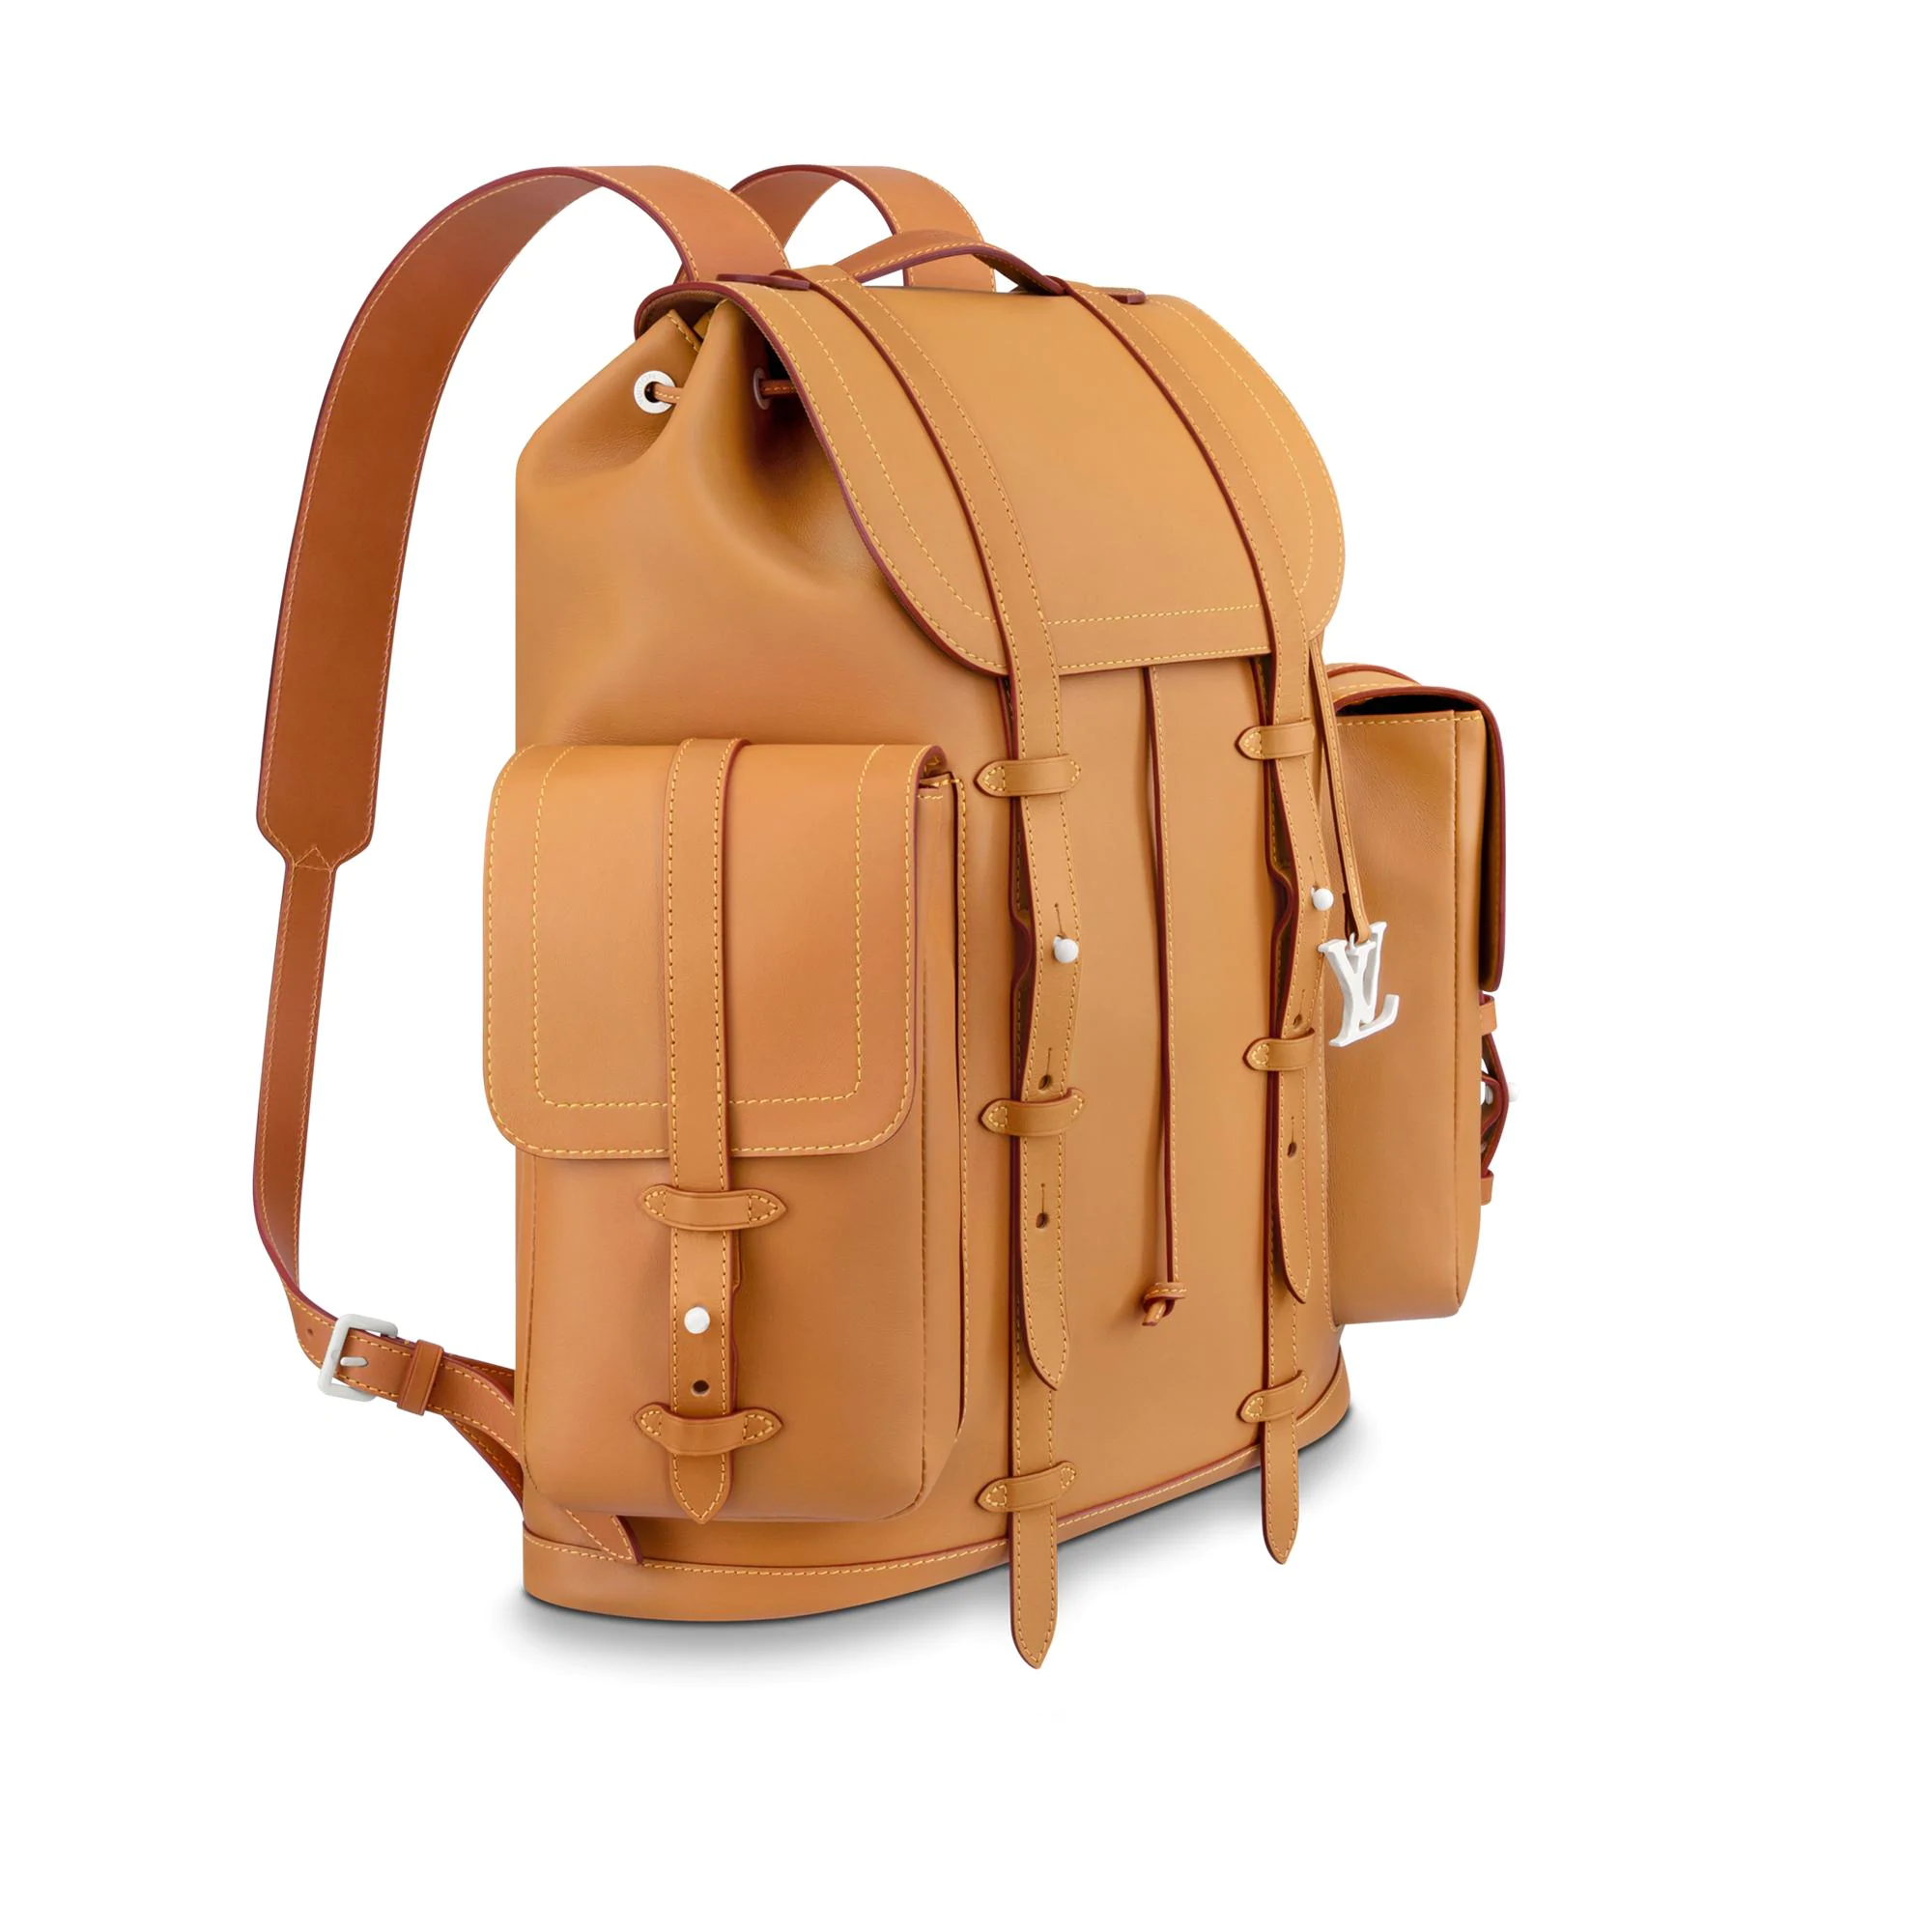 Sold at Auction: Louis Vuitton Tan Vachetta Leather Christopher GM Backpack  Condition: 2 17.5 Wi